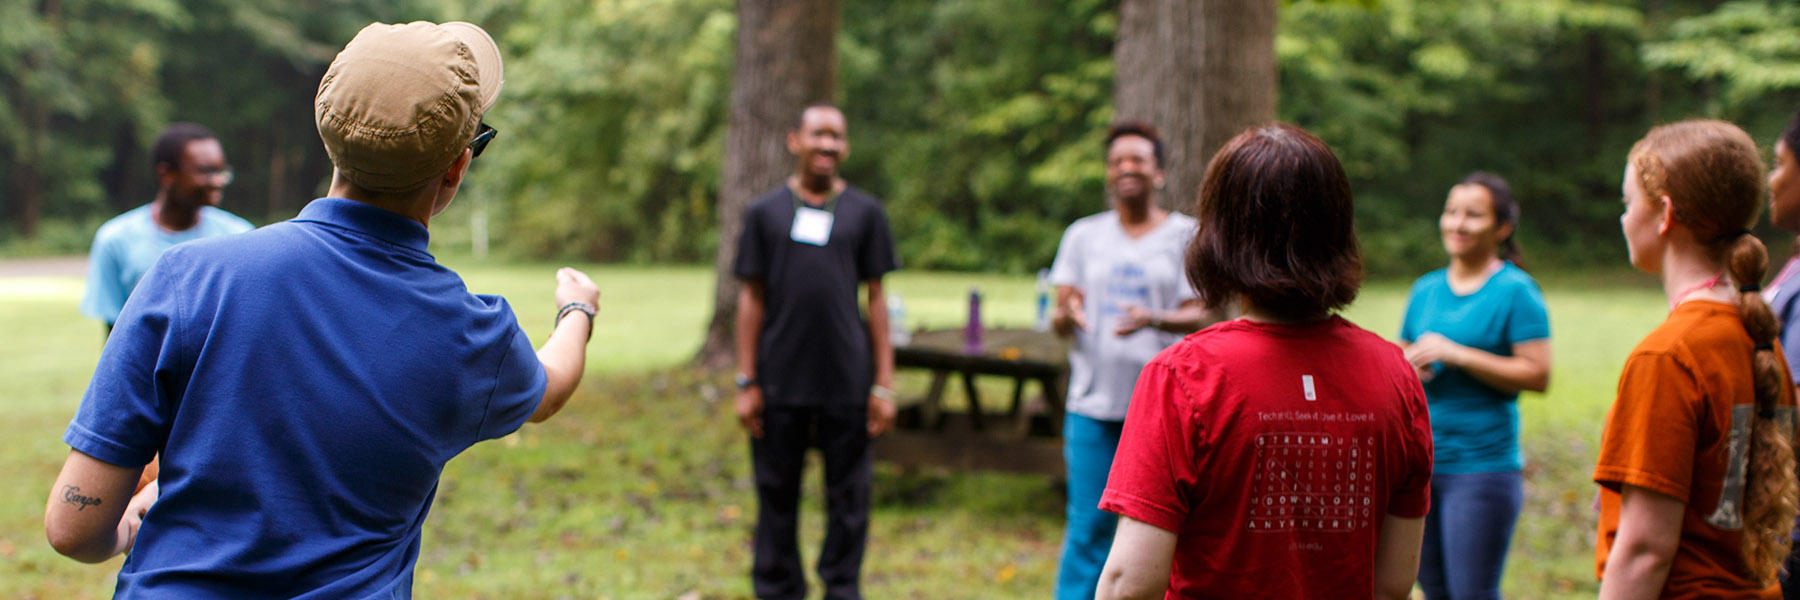 A Bradford Woods facilitator guides a smiling group in an activity in an outdoor green space.